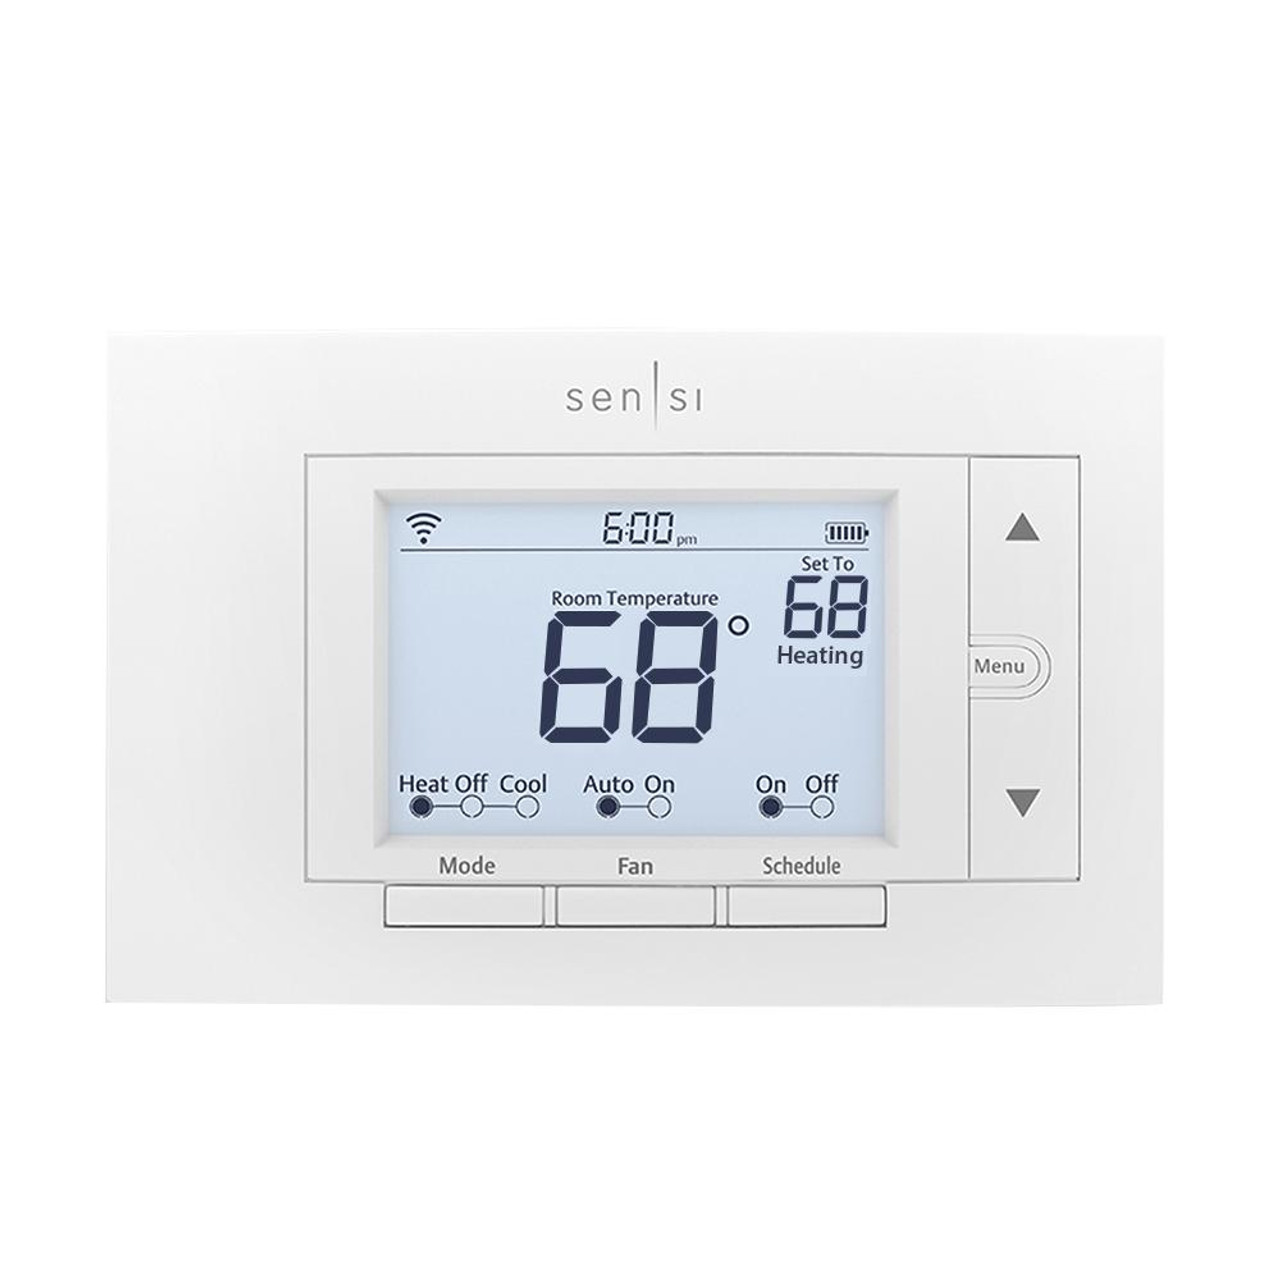 How To Reset My Sensi Thermostat